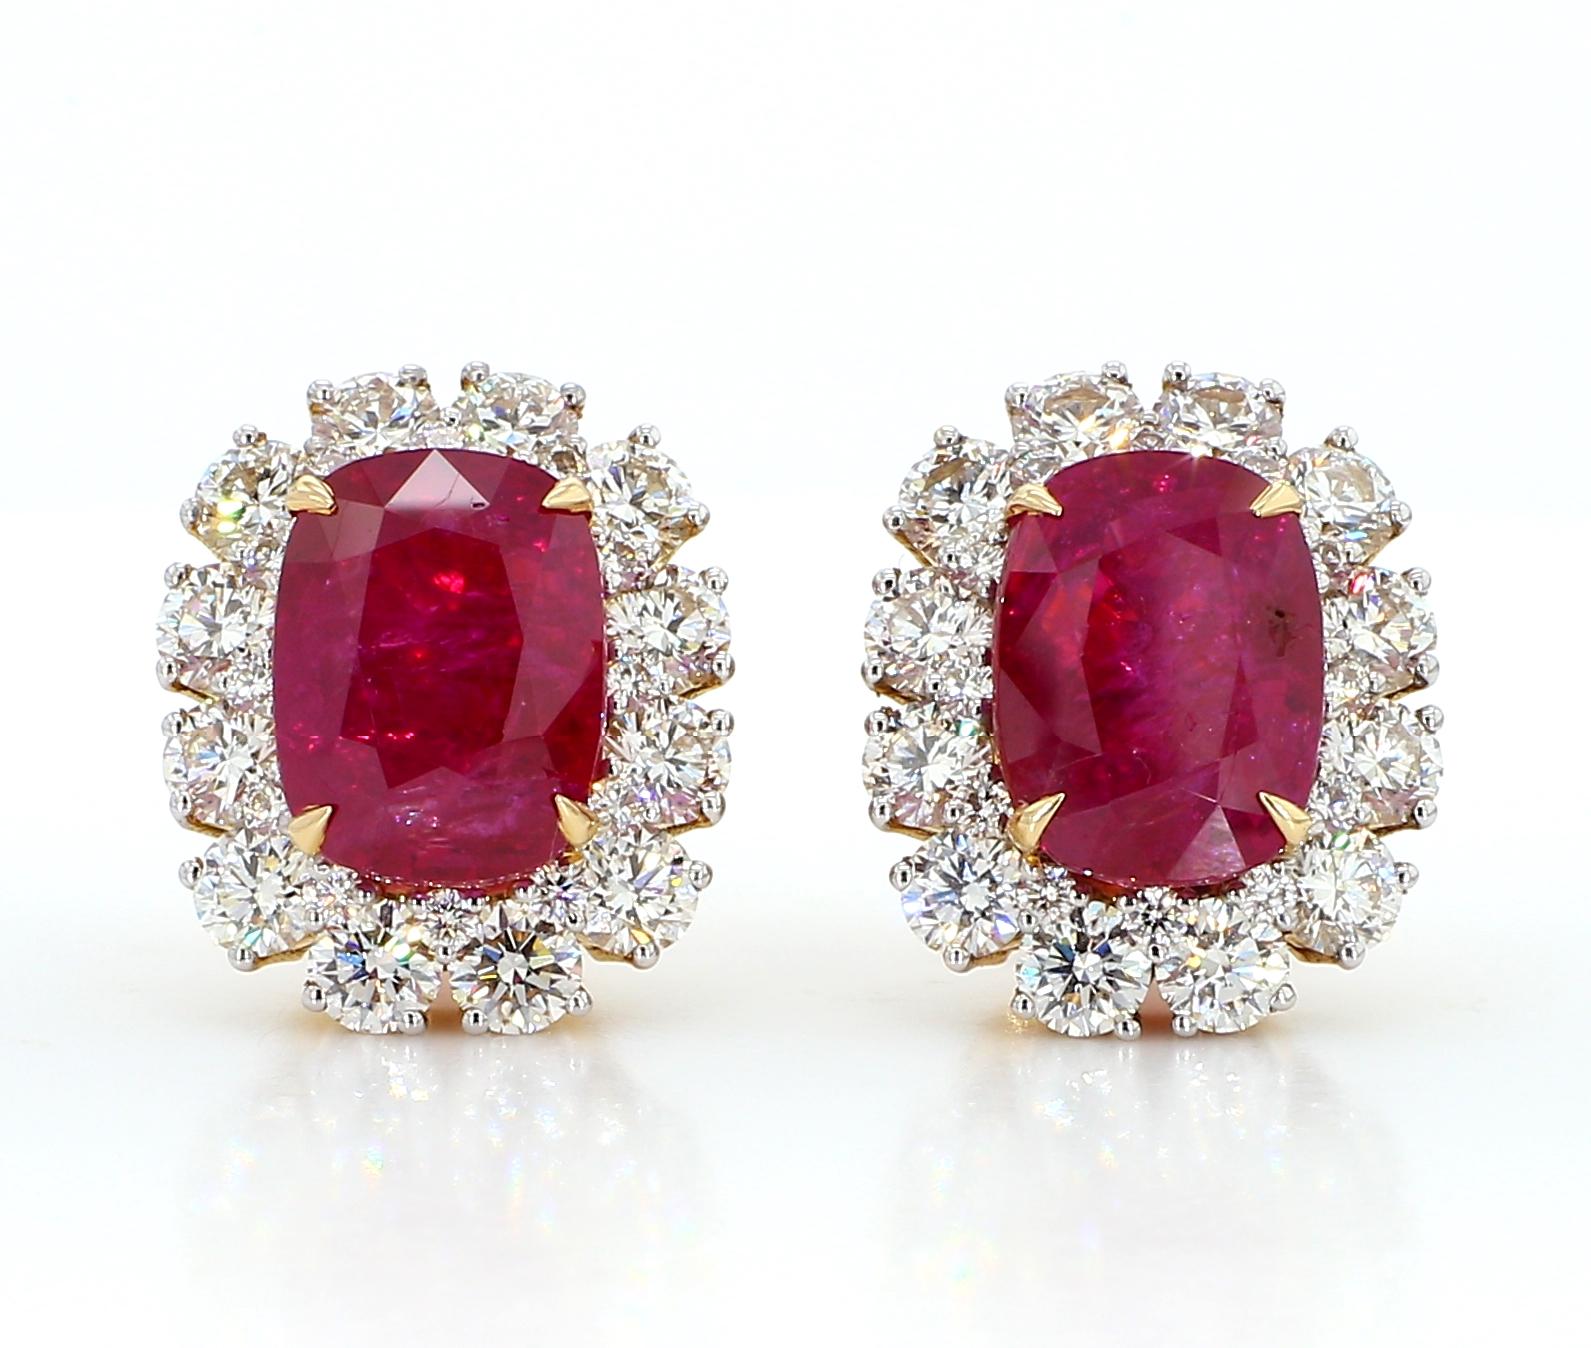 SSEF 11 Carat No Heat Natural Burmese Ruby and Diamond 18K Gold Earrings For Sale 5